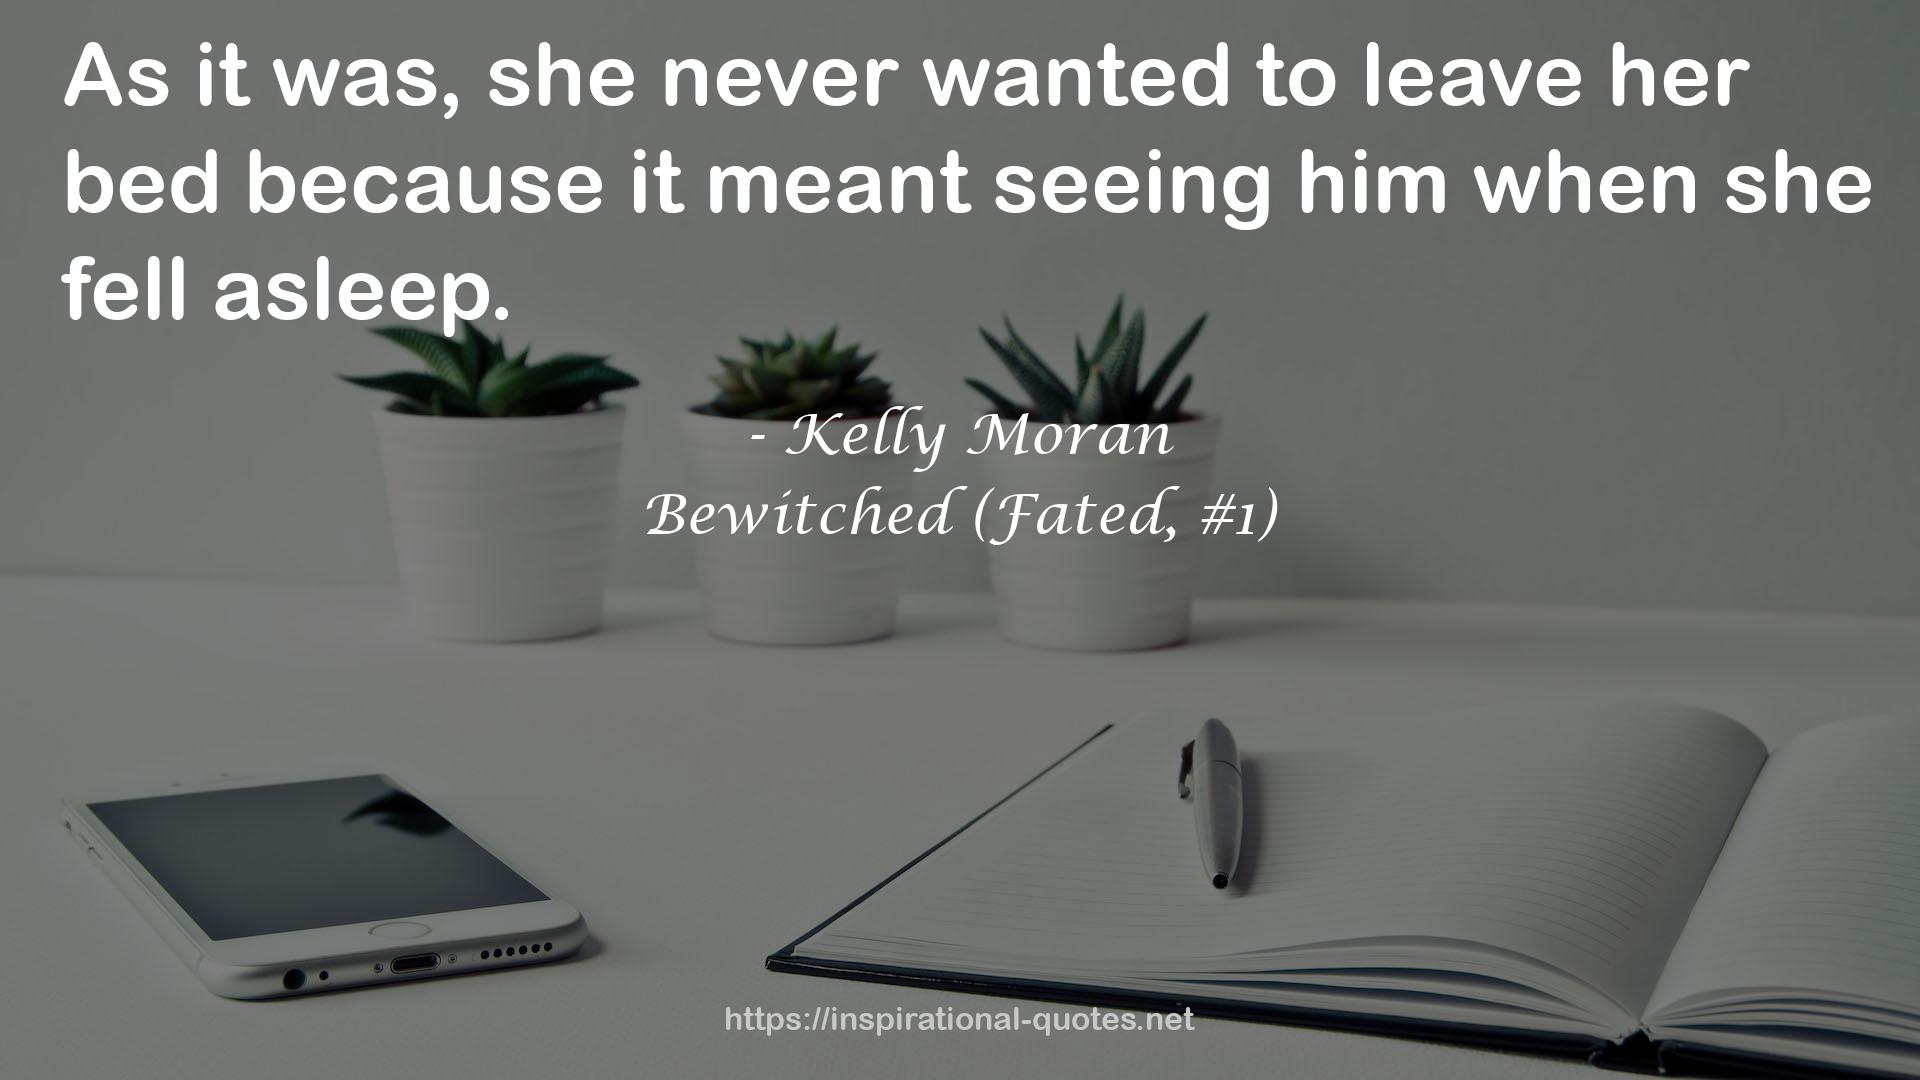 Bewitched (Fated, #1) QUOTES